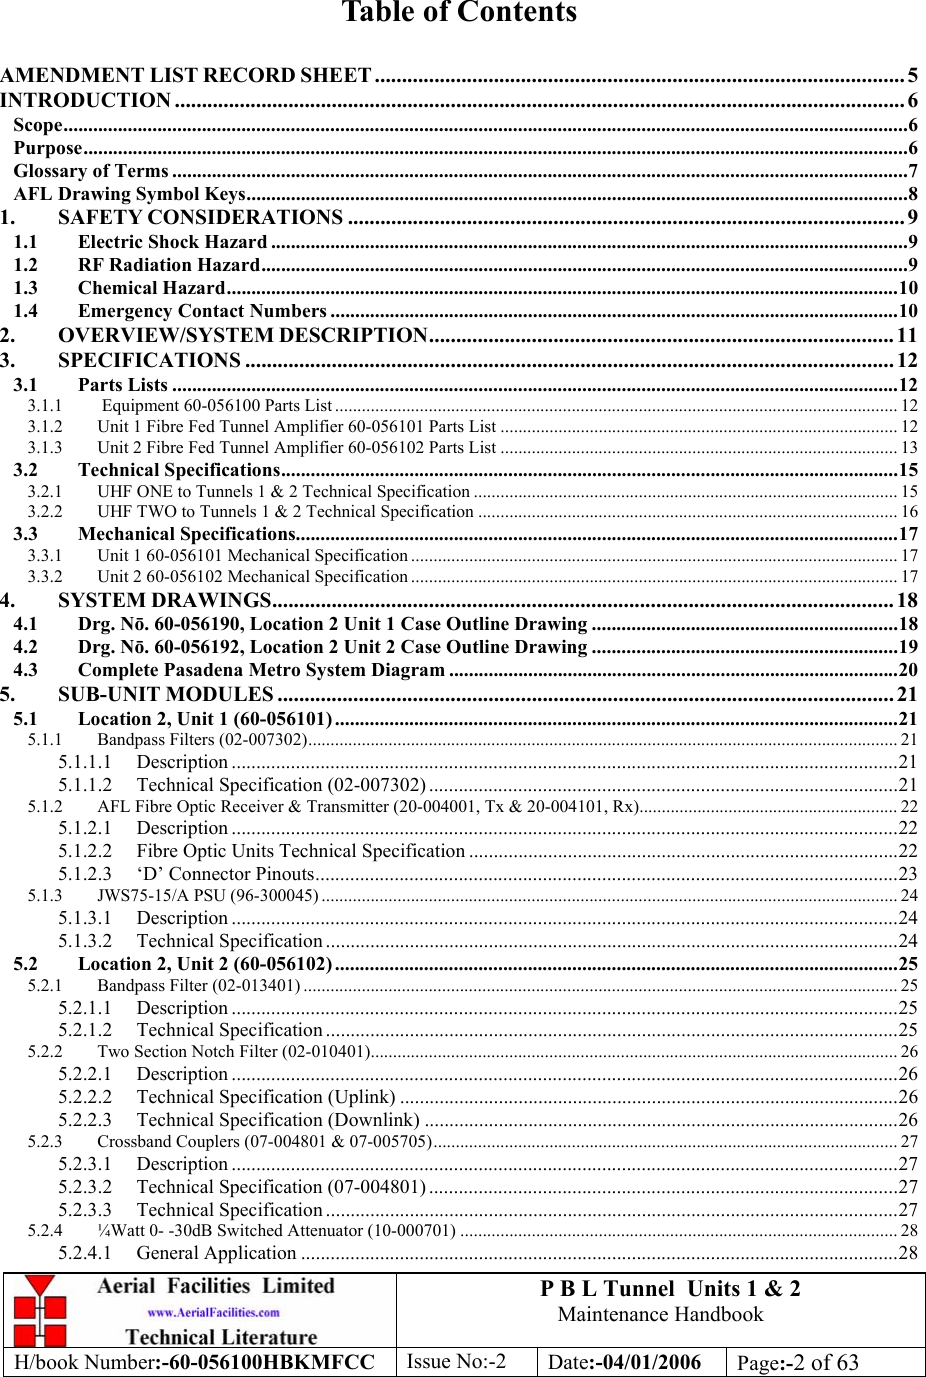 P B L Tunnel  Units 1 &amp; 2 Maintenance Handbook H/book Number:-60-056100HBKMFCC  Issue No:-2  Date:-04/01/2006  Page:-2 of 63   Table of Contents  AMENDMENT LIST RECORD SHEET .................................................................................................. 5 INTRODUCTION ....................................................................................................................................... 6 Scope...........................................................................................................................................................................6 Purpose.......................................................................................................................................................................6 Glossary of Terms .....................................................................................................................................................7 AFL Drawing Symbol Keys......................................................................................................................................8 1. SAFETY CONSIDERATIONS ....................................................................................................... 9 1.1 Electric Shock Hazard .................................................................................................................................9 1.2 RF Radiation Hazard...................................................................................................................................9 1.3 Chemical Hazard........................................................................................................................................10 1.4 Emergency Contact Numbers ...................................................................................................................10 2. OVERVIEW/SYSTEM DESCRIPTION...................................................................................... 11 3. SPECIFICATIONS ........................................................................................................................ 12 3.1 Parts Lists ...................................................................................................................................................12 3.1.1  Equipment 60-056100 Parts List .............................................................................................................................. 12 3.1.2 Unit 1 Fibre Fed Tunnel Amplifier 60-056101 Parts List ......................................................................................... 12 3.1.3 Unit 2 Fibre Fed Tunnel Amplifier 60-056102 Parts List ......................................................................................... 13 3.2 Technical Specifications.............................................................................................................................15 3.2.1 UHF ONE to Tunnels 1 &amp; 2 Technical Specification ............................................................................................... 15 3.2.2 UHF TWO to Tunnels 1 &amp; 2 Technical Specification .............................................................................................. 16 3.3 Mechanical Specifications..........................................................................................................................17 3.3.1 Unit 1 60-056101 Mechanical Specification ............................................................................................................. 17 3.3.2 Unit 2 60-056102 Mechanical Specification ............................................................................................................. 17 4. SYSTEM DRAWINGS................................................................................................................... 18 4.1 Drg. Nō. 60-056190, Location 2 Unit 1 Case Outline Drawing ..............................................................18 4.2 Drg. Nō. 60-056192, Location 2 Unit 2 Case Outline Drawing ..............................................................19 4.3 Complete Pasadena Metro System Diagram ...........................................................................................20 5. SUB-UNIT MODULES .................................................................................................................. 21 5.1 Location 2, Unit 1 (60-056101) ..................................................................................................................21 5.1.1 Bandpass Filters (02-007302).................................................................................................................................... 21 5.1.1.1 Description .......................................................................................................................................21 5.1.1.2 Technical Specification (02-007302) ...............................................................................................21 5.1.2 AFL Fibre Optic Receiver &amp; Transmitter (20-004001, Tx &amp; 20-004101, Rx)..........................................................22 5.1.2.1 Description .......................................................................................................................................22 5.1.2.2 Fibre Optic Units Technical Specification .......................................................................................22 5.1.2.3 ‘D’ Connector Pinouts......................................................................................................................23 5.1.3 JWS75-15/A PSU (96-300045) ................................................................................................................................. 24 5.1.3.1 Description .......................................................................................................................................24 5.1.3.2 Technical Specification ....................................................................................................................24 5.2 Location 2, Unit 2 (60-056102) ..................................................................................................................25 5.2.1 Bandpass Filter (02-013401) ..................................................................................................................................... 25 5.2.1.1 Description .......................................................................................................................................25 5.2.1.2 Technical Specification ....................................................................................................................25 5.2.2 Two Section Notch Filter (02-010401)...................................................................................................................... 26 5.2.2.1 Description .......................................................................................................................................26 5.2.2.2 Technical Specification (Uplink) .....................................................................................................26 5.2.2.3 Technical Specification (Downlink) ................................................................................................26 5.2.3 Crossband Couplers (07-004801 &amp; 07-005705)........................................................................................................ 27 5.2.3.1 Description .......................................................................................................................................27 5.2.3.2 Technical Specification (07-004801) ...............................................................................................27 5.2.3.3 Technical Specification ....................................................................................................................27 5.2.4 ¼Watt 0- -30dB Switched Attenuator (10-000701) .................................................................................................. 28 5.2.4.1 General Application .........................................................................................................................28 